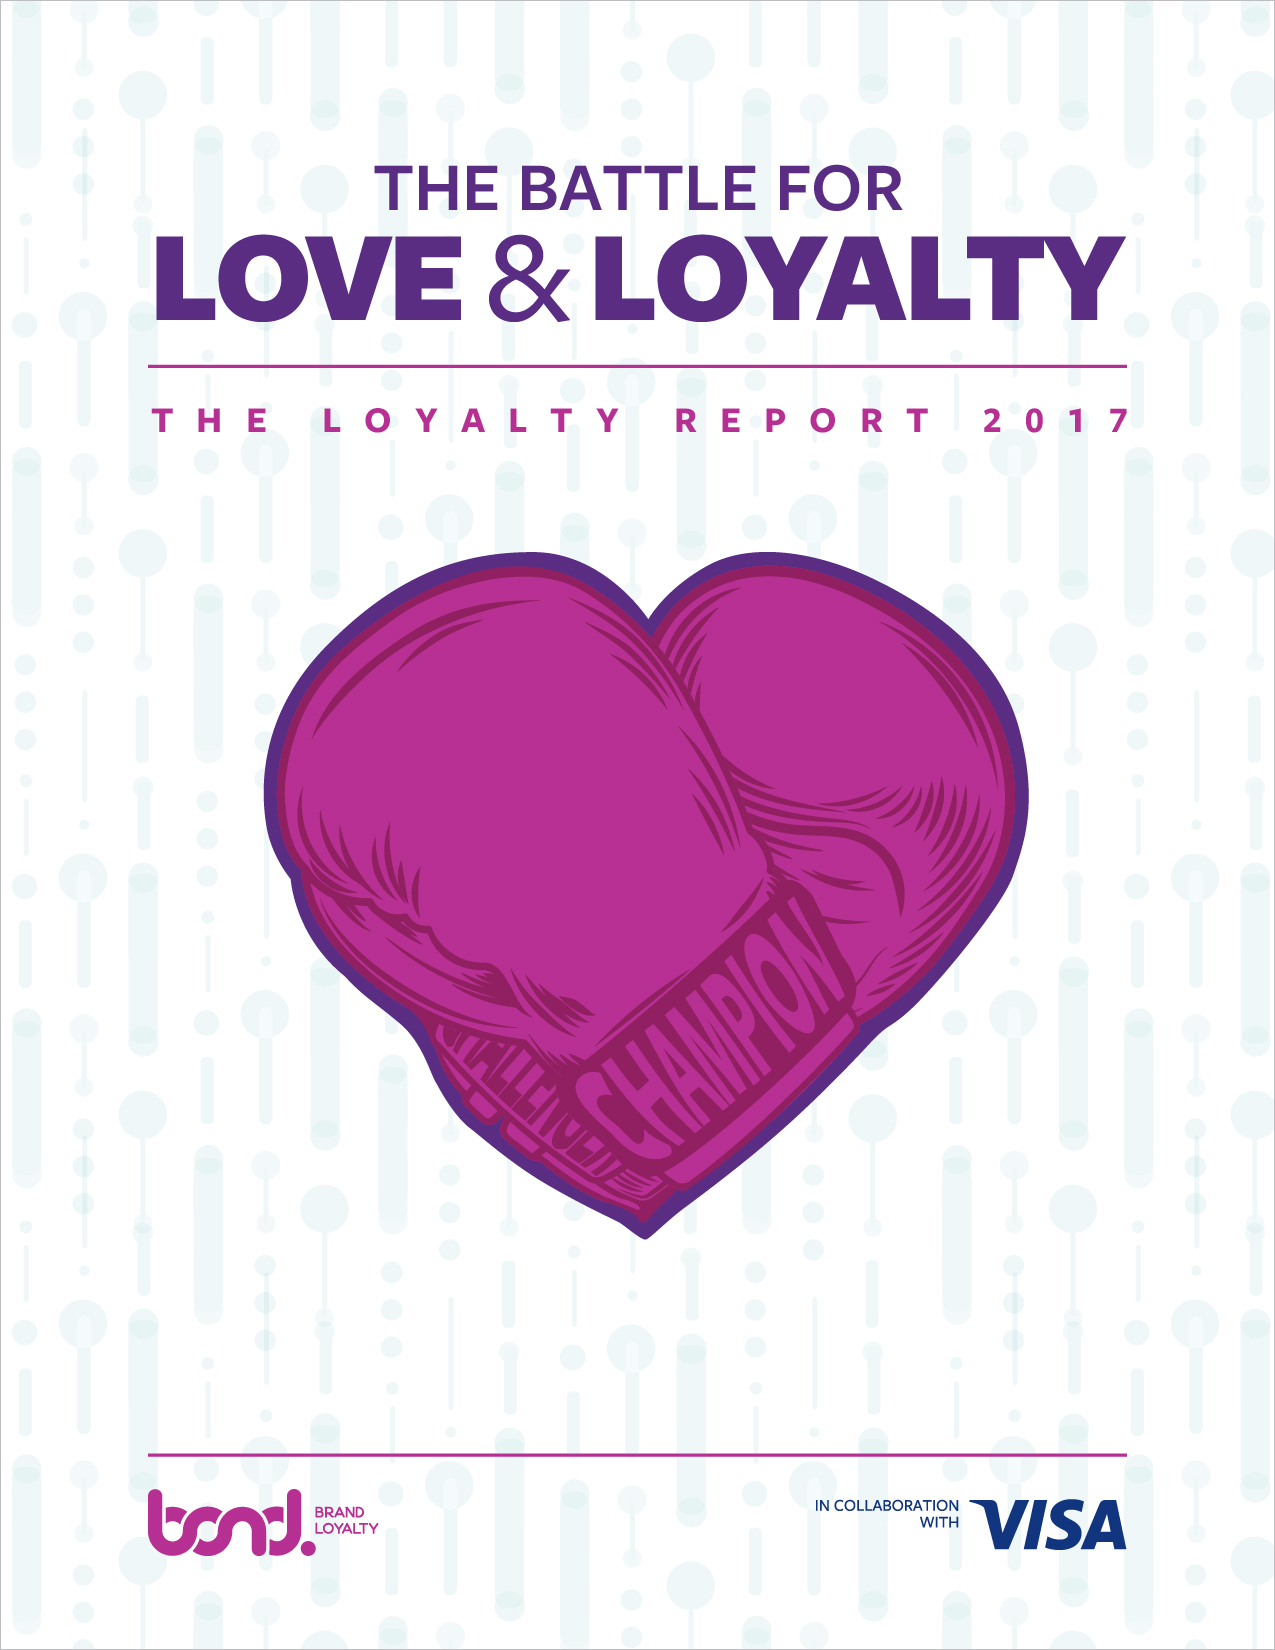 The Loyalty Report 2017